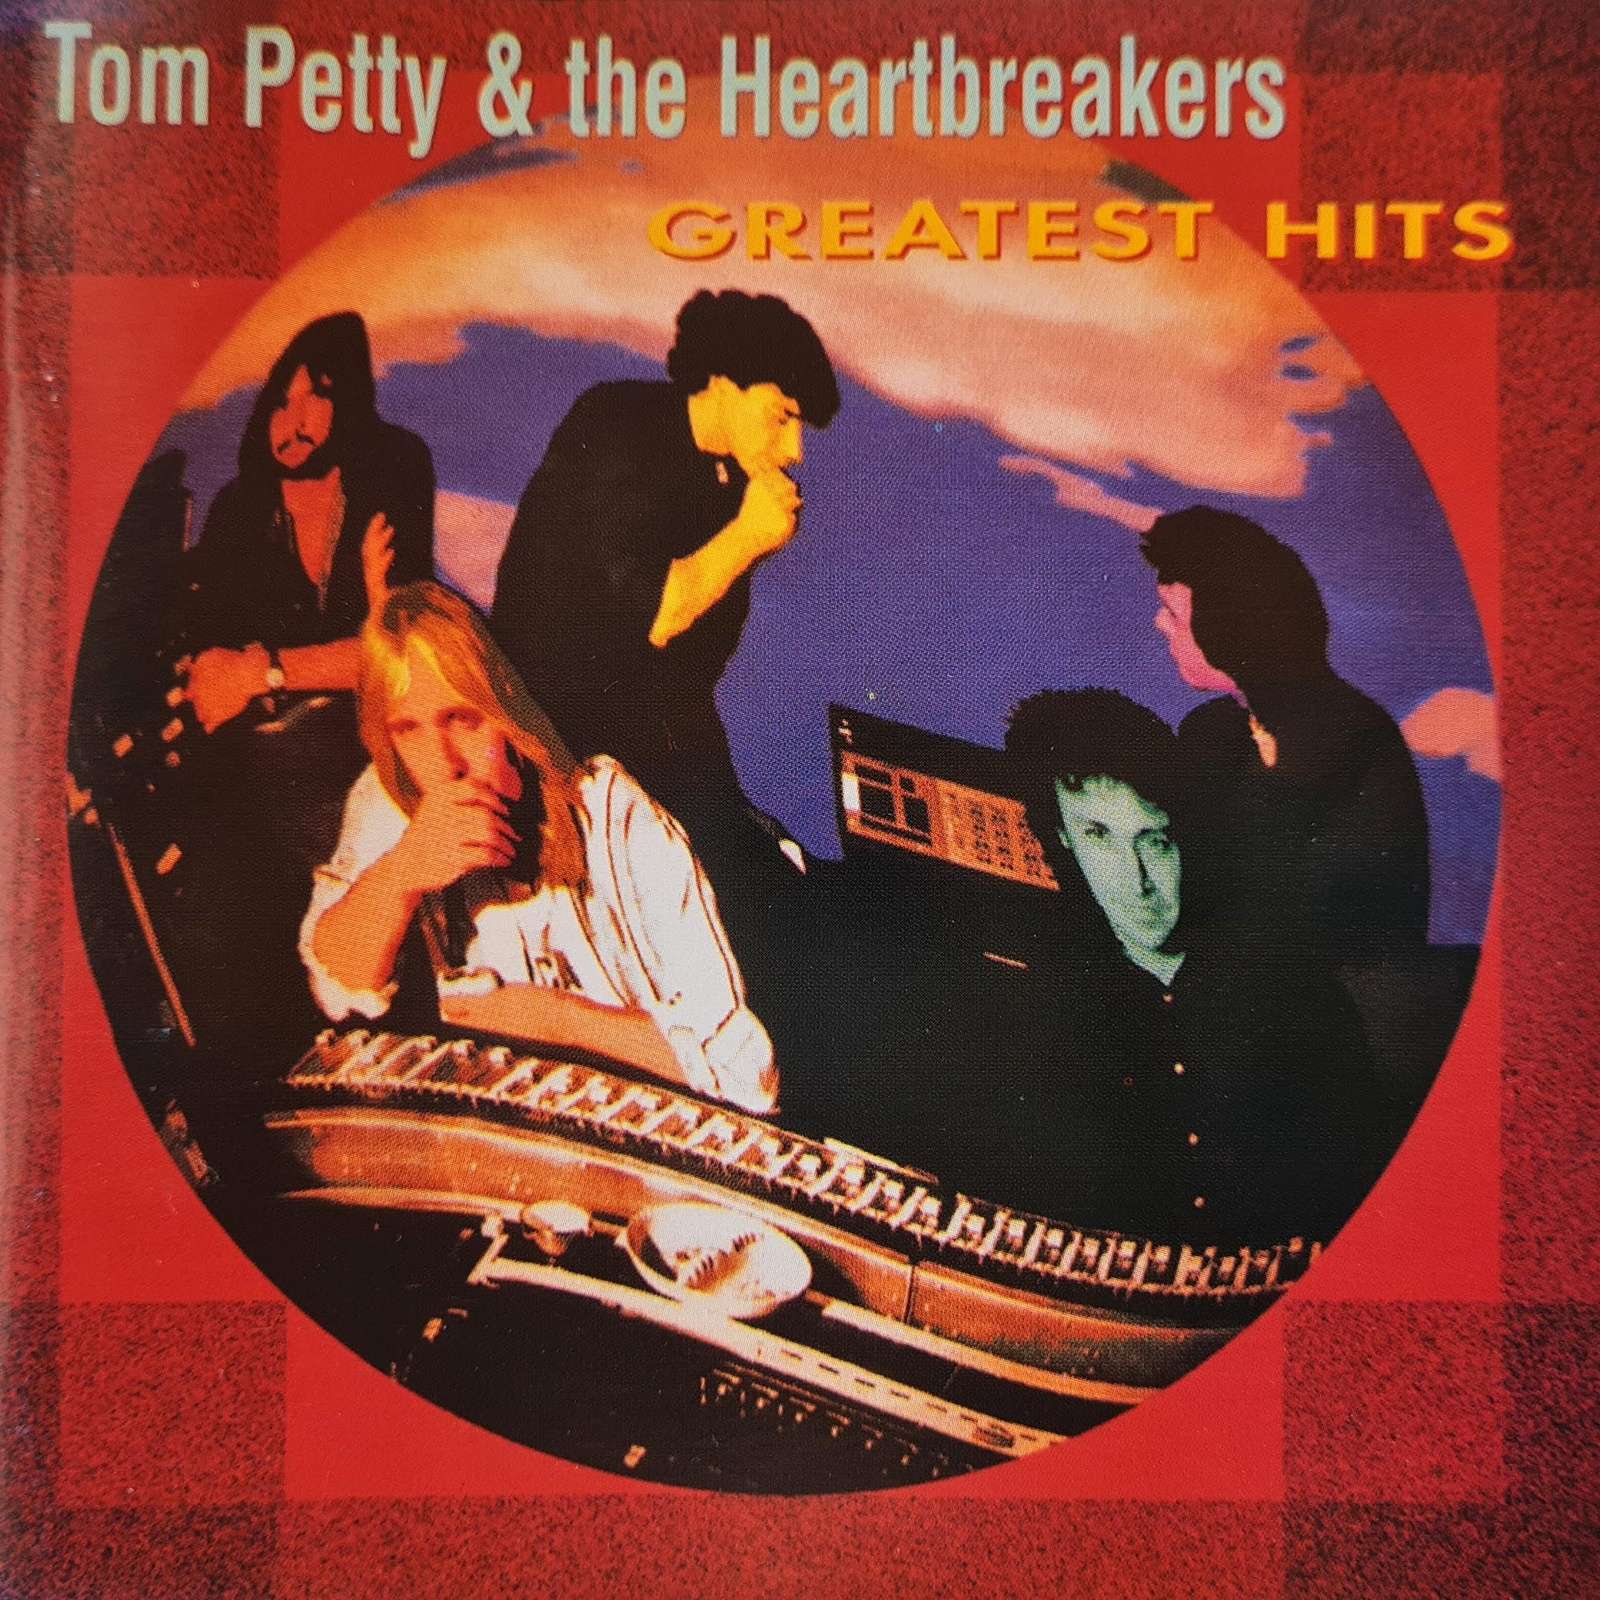 Tom Petty & the Heartbreakers - Greatest Hits (CD)